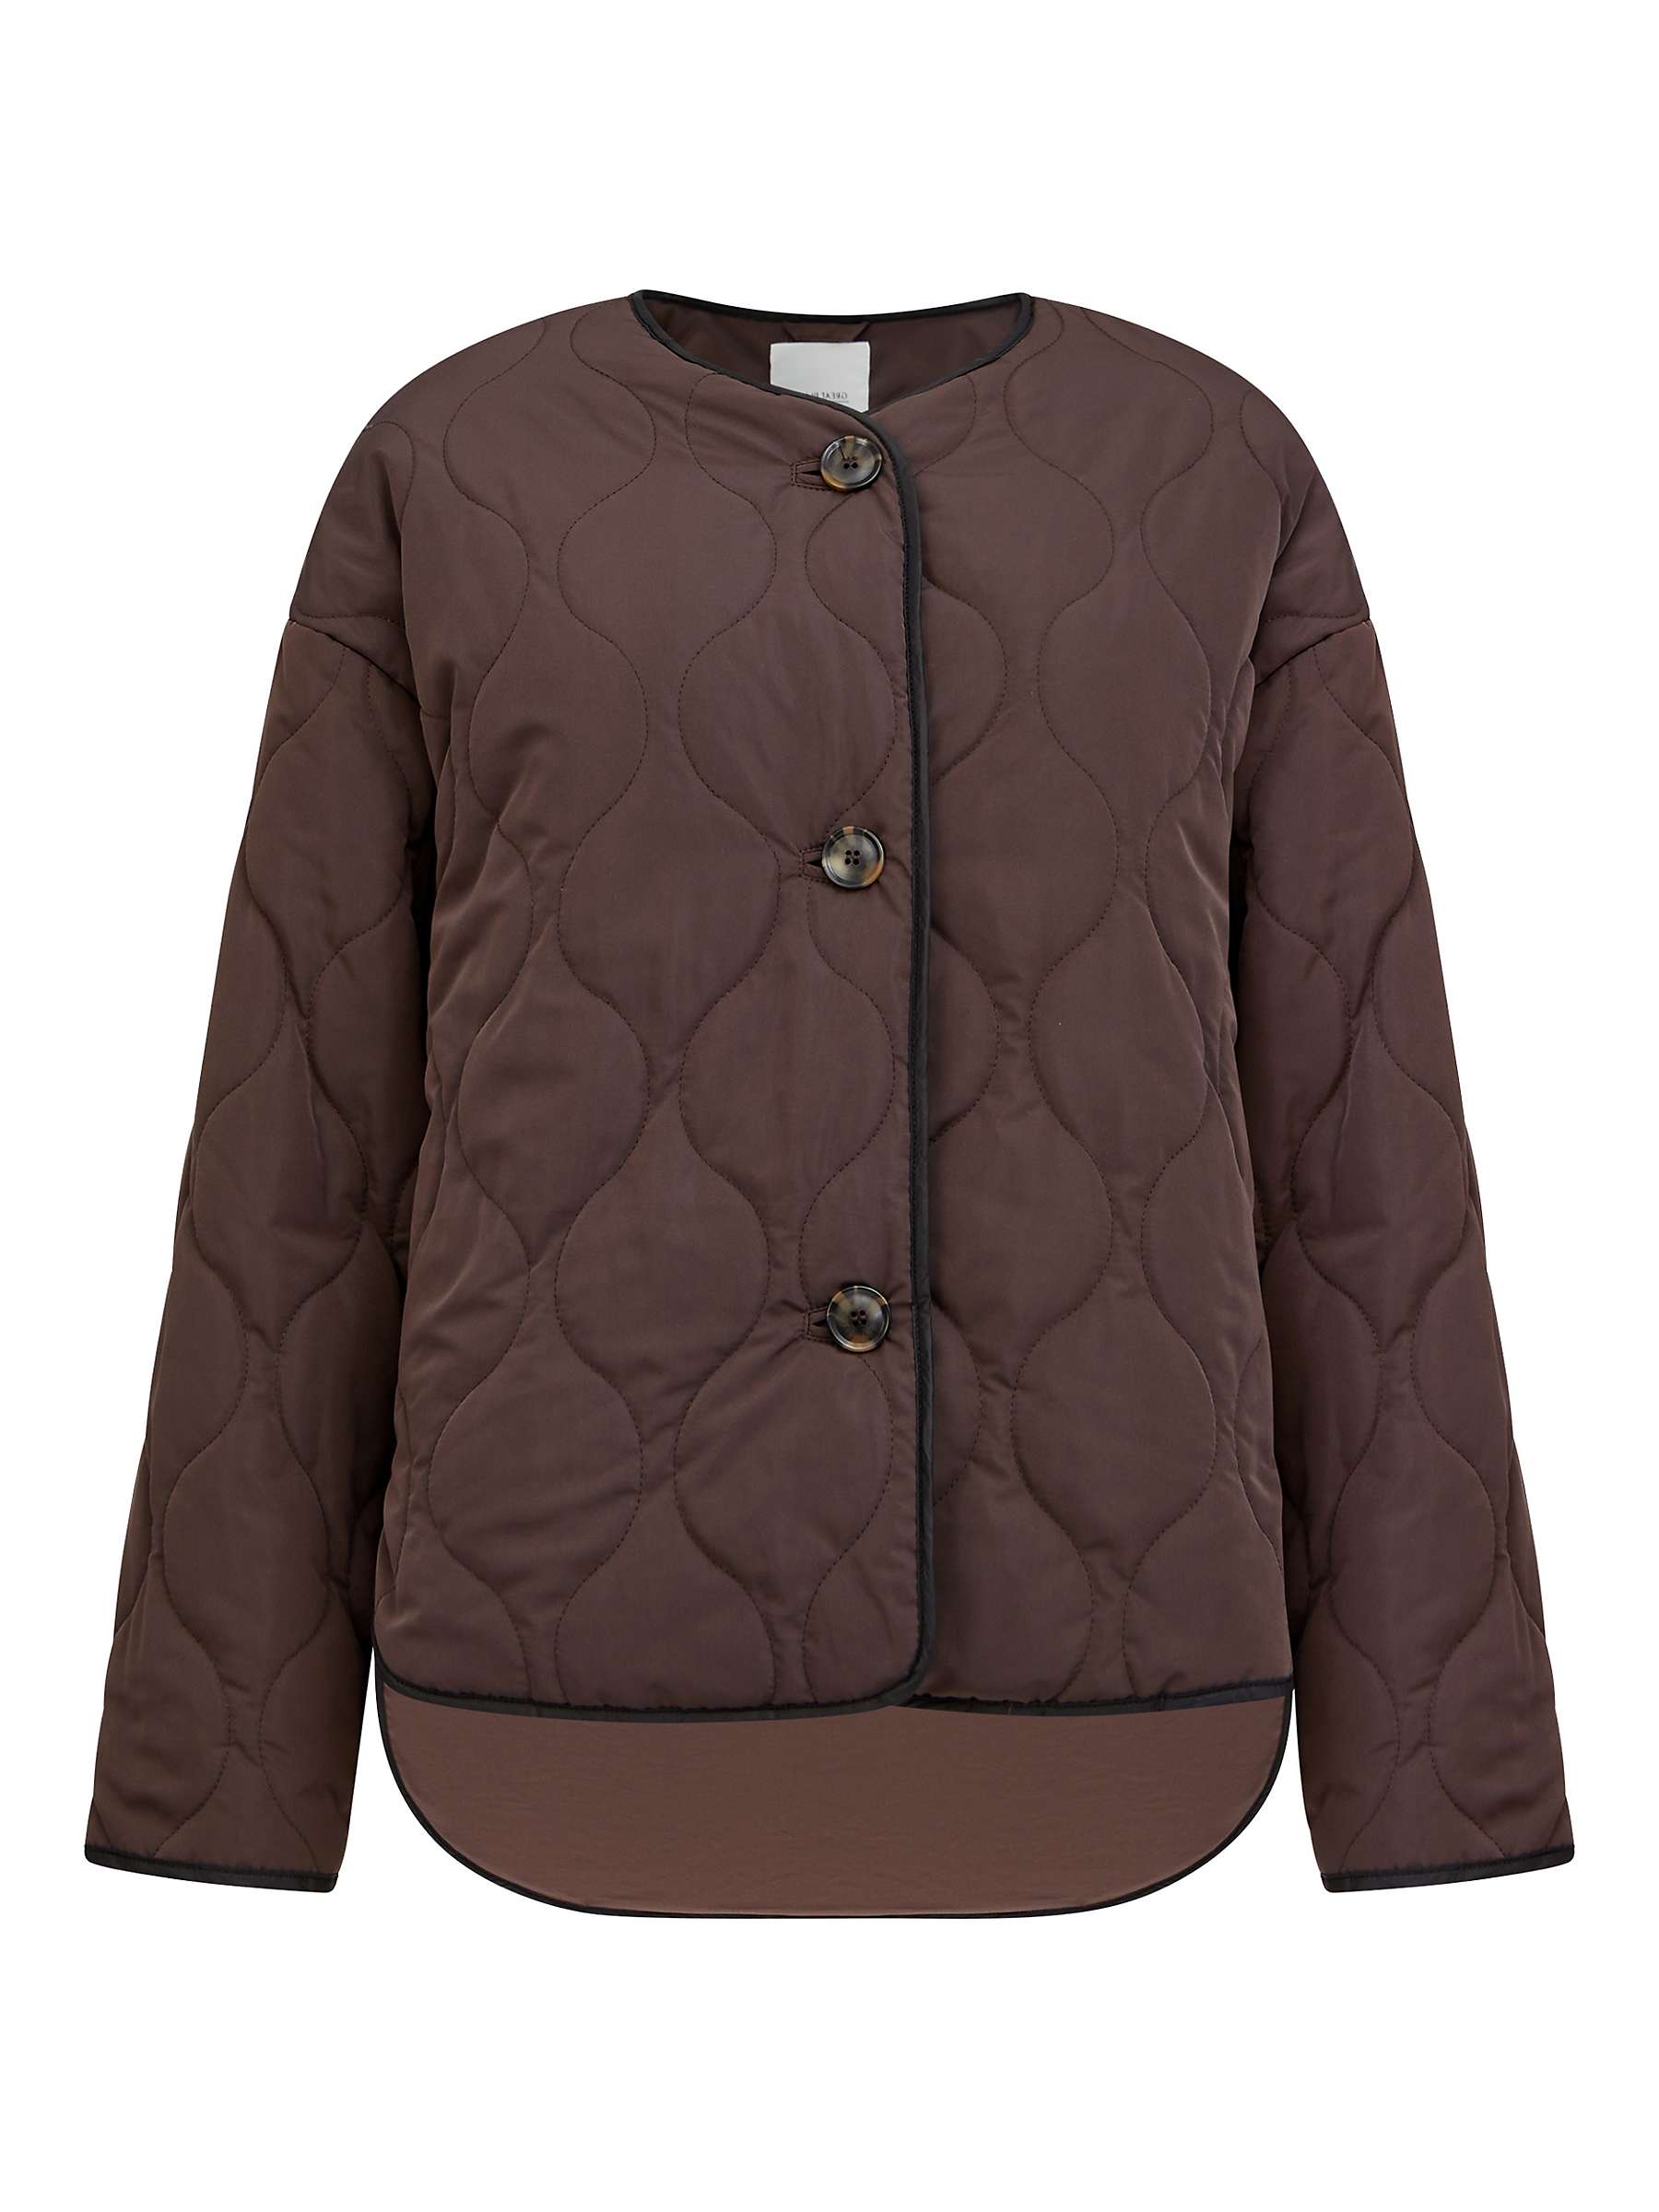 Buy Great Plains Utility Diamond Quilted Parka Coat, Cocoa Online at johnlewis.com